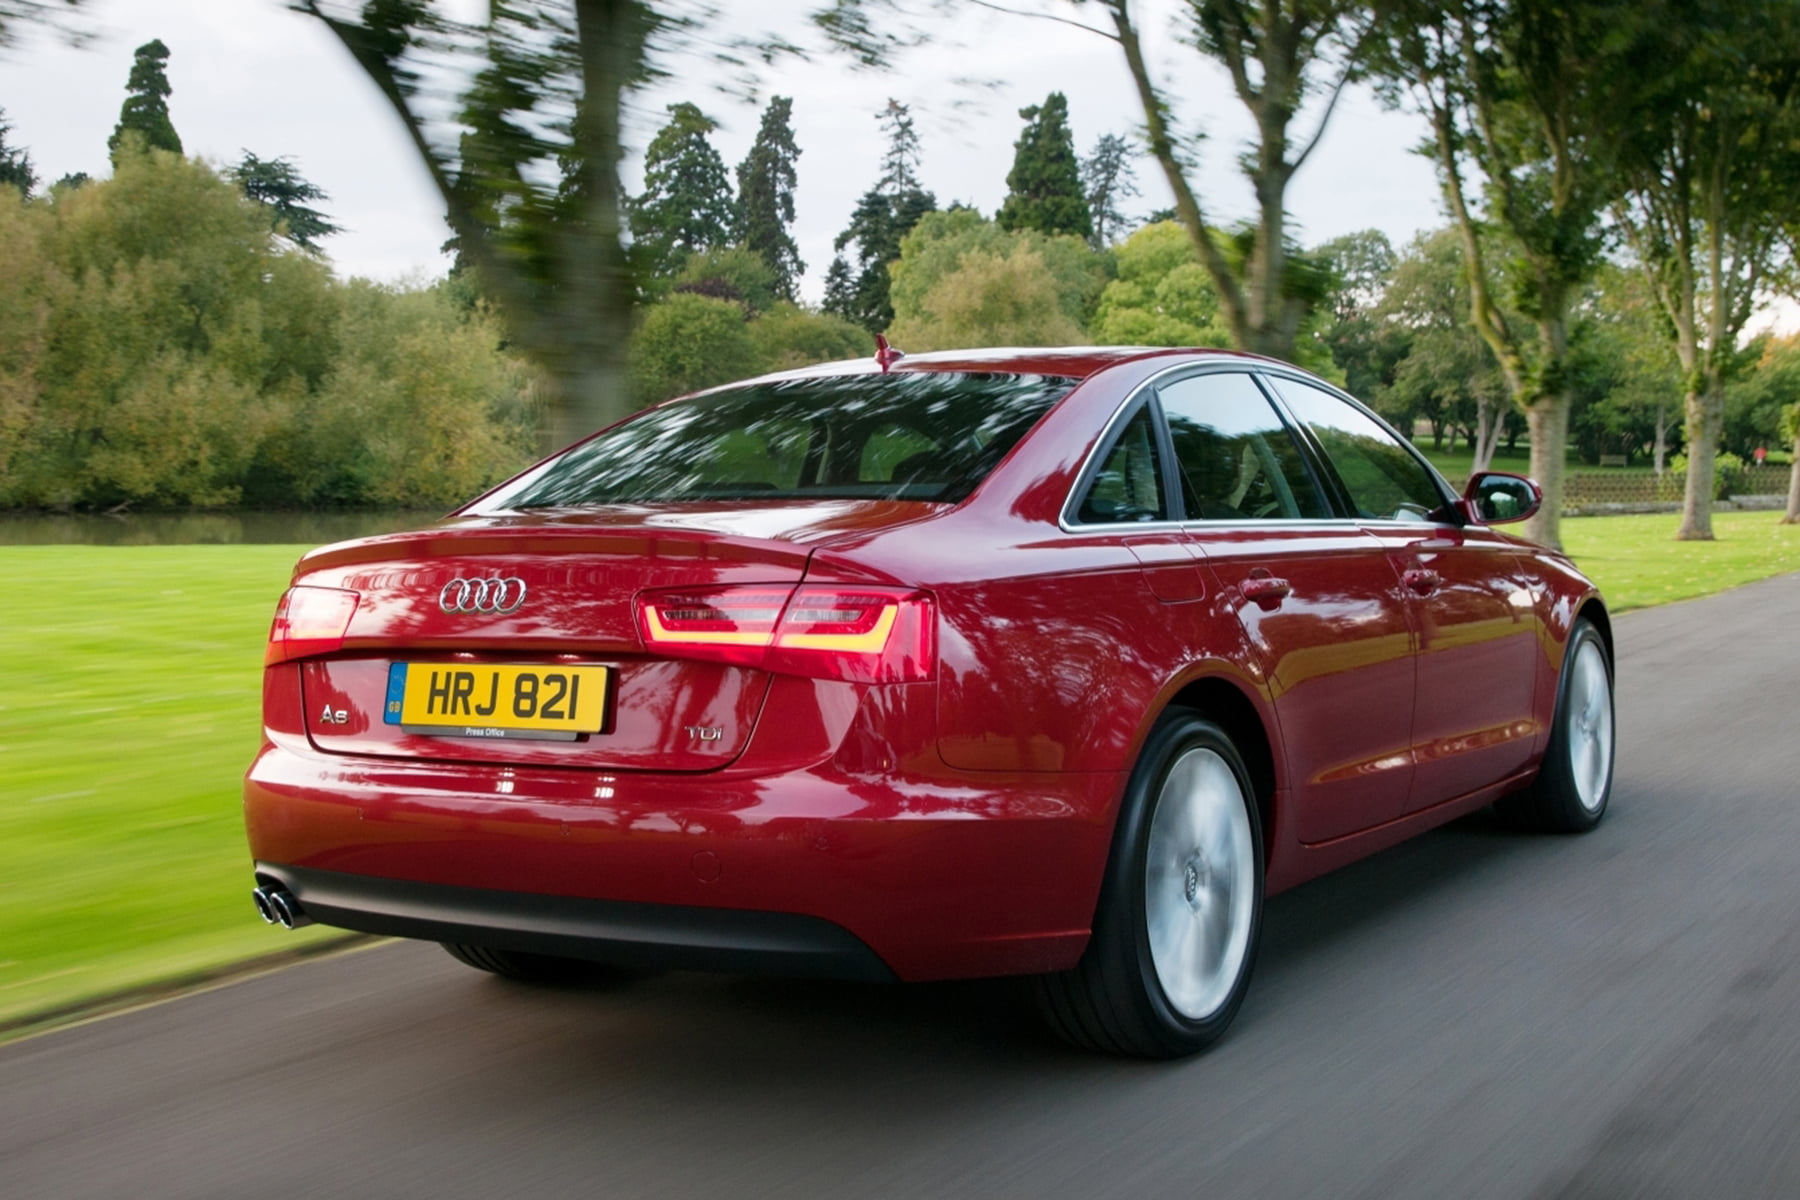 Audi A6 (2011 - 2015) rear view | Expert Rating